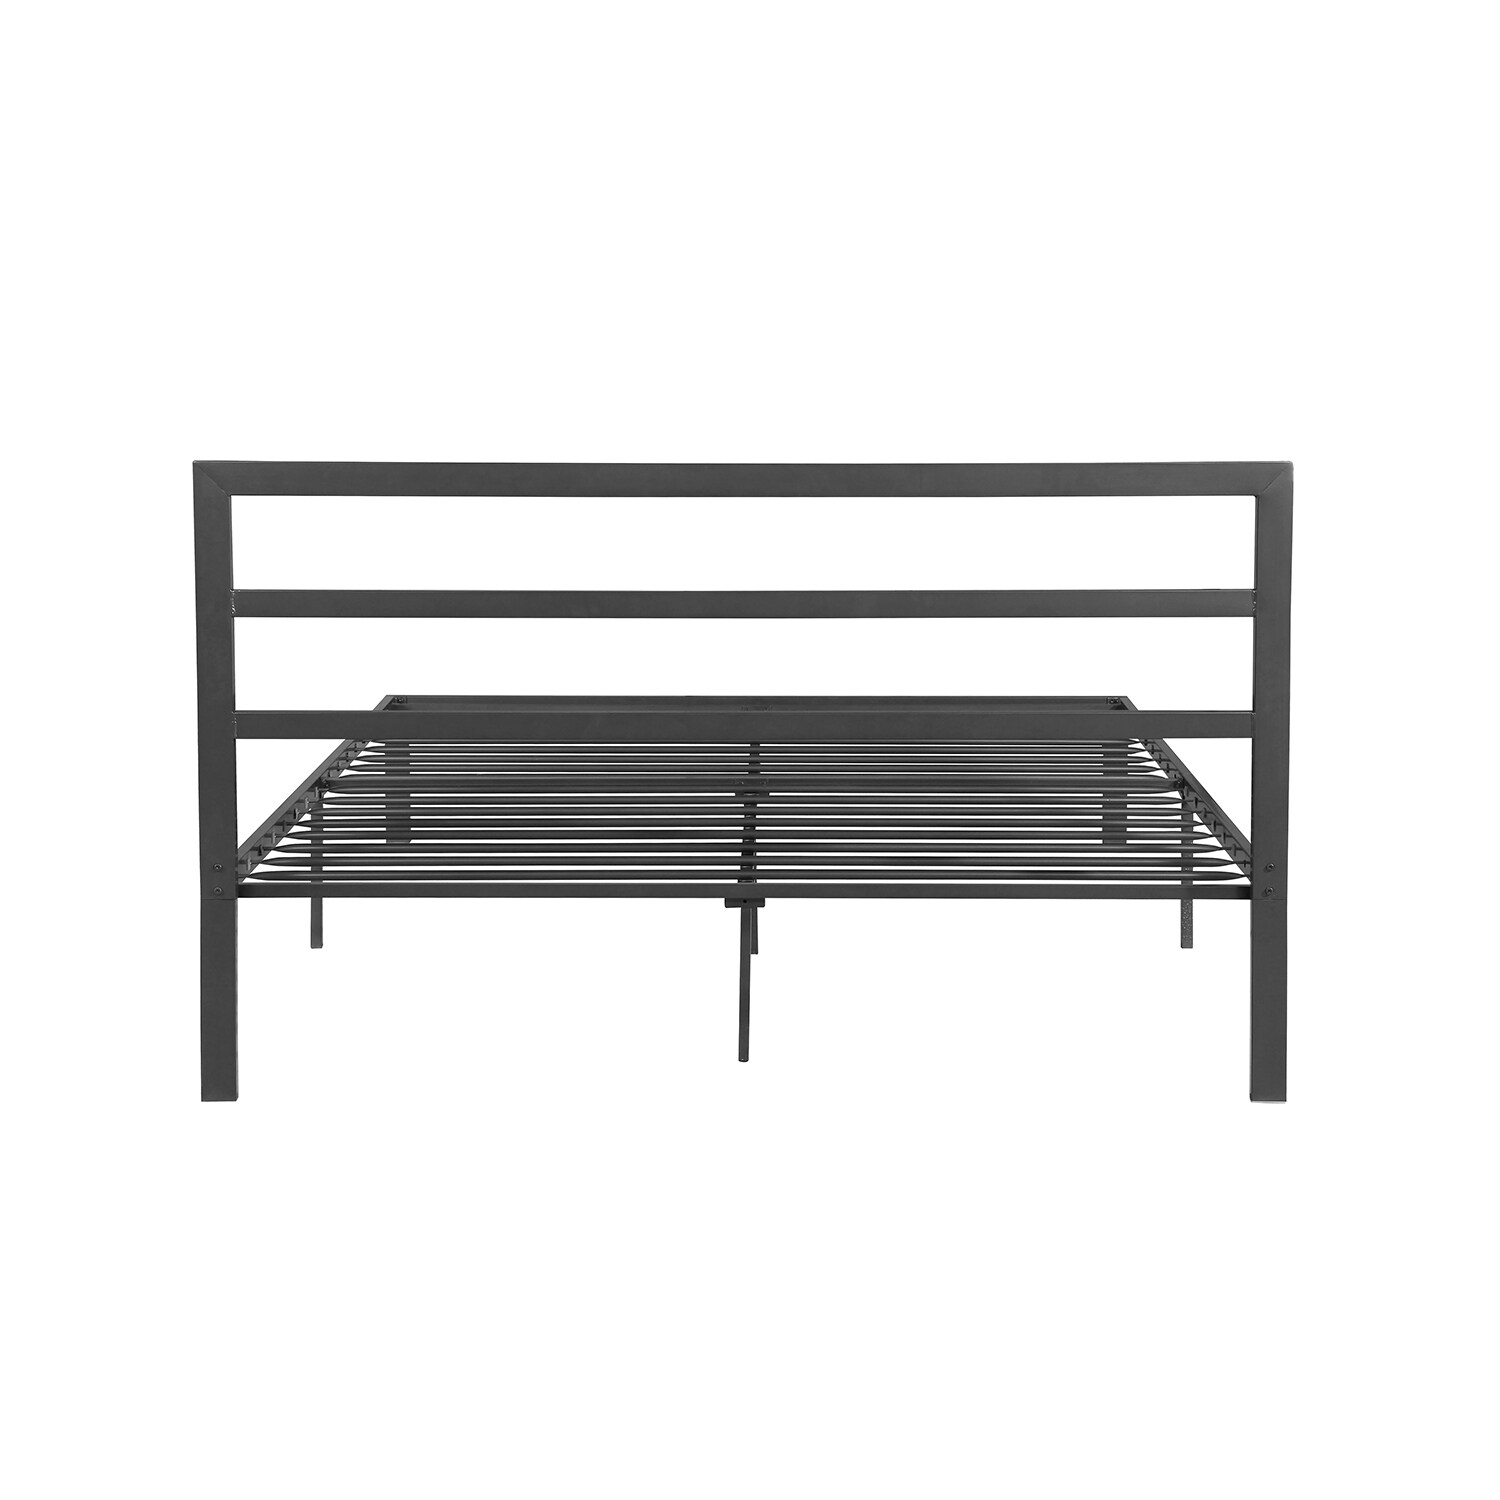 GZMR Queen Size Metal Bed Frame Charcoal Gray Queen Metal Bed Frame in ...